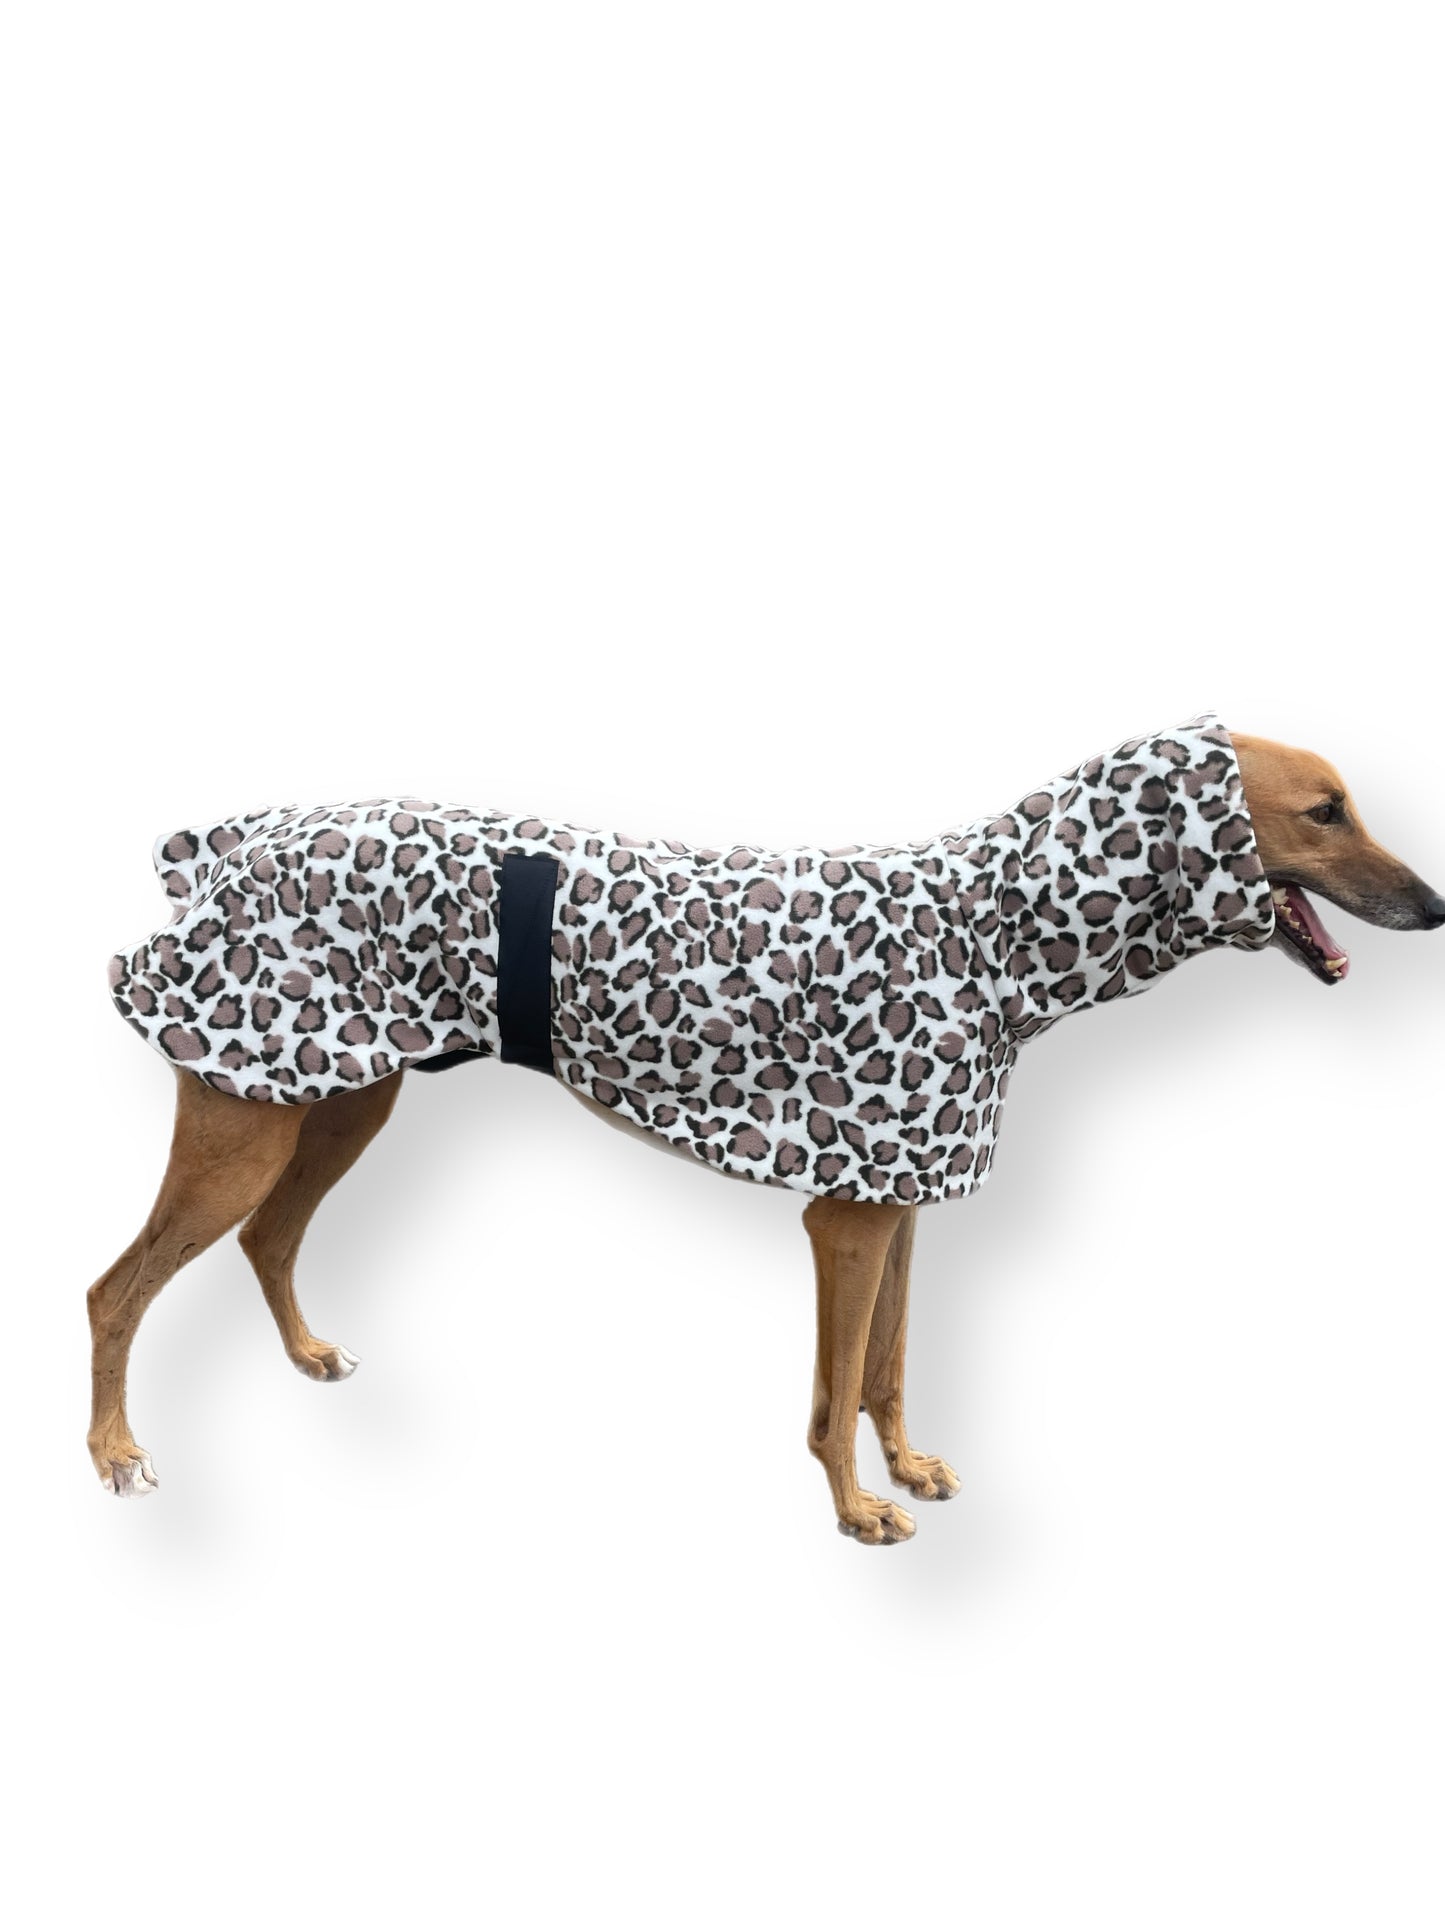 Greyhound Deluxe style coat rug double extra thick polar fleece leopard print washable extra wide hoodie